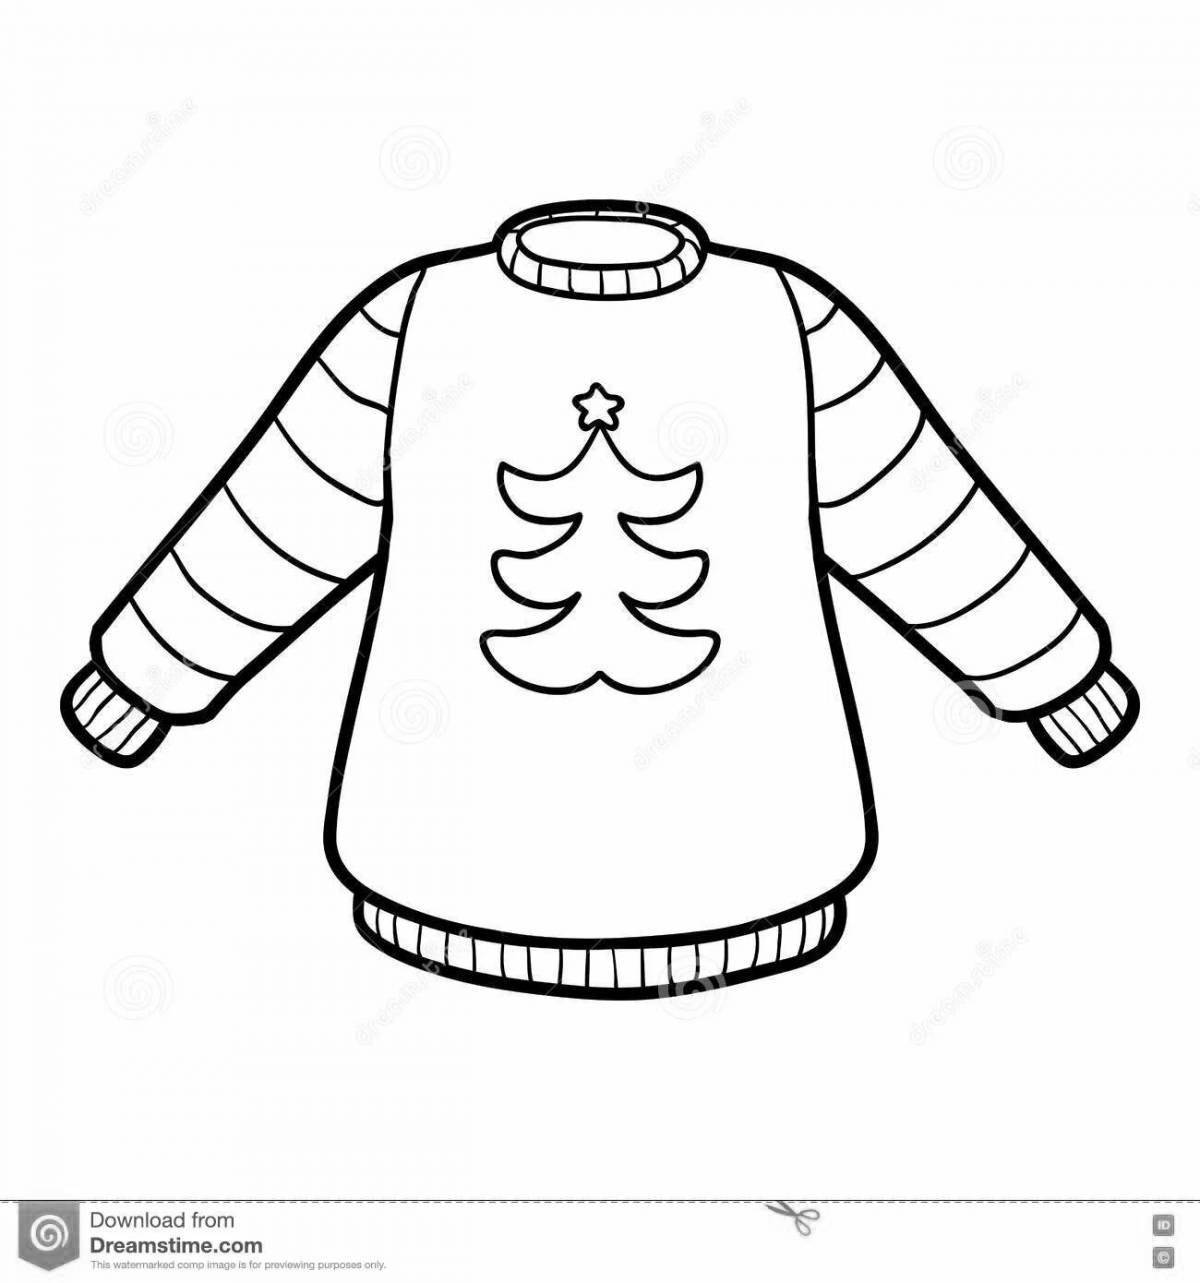 Innovative Preschool Sweater Coloring Page